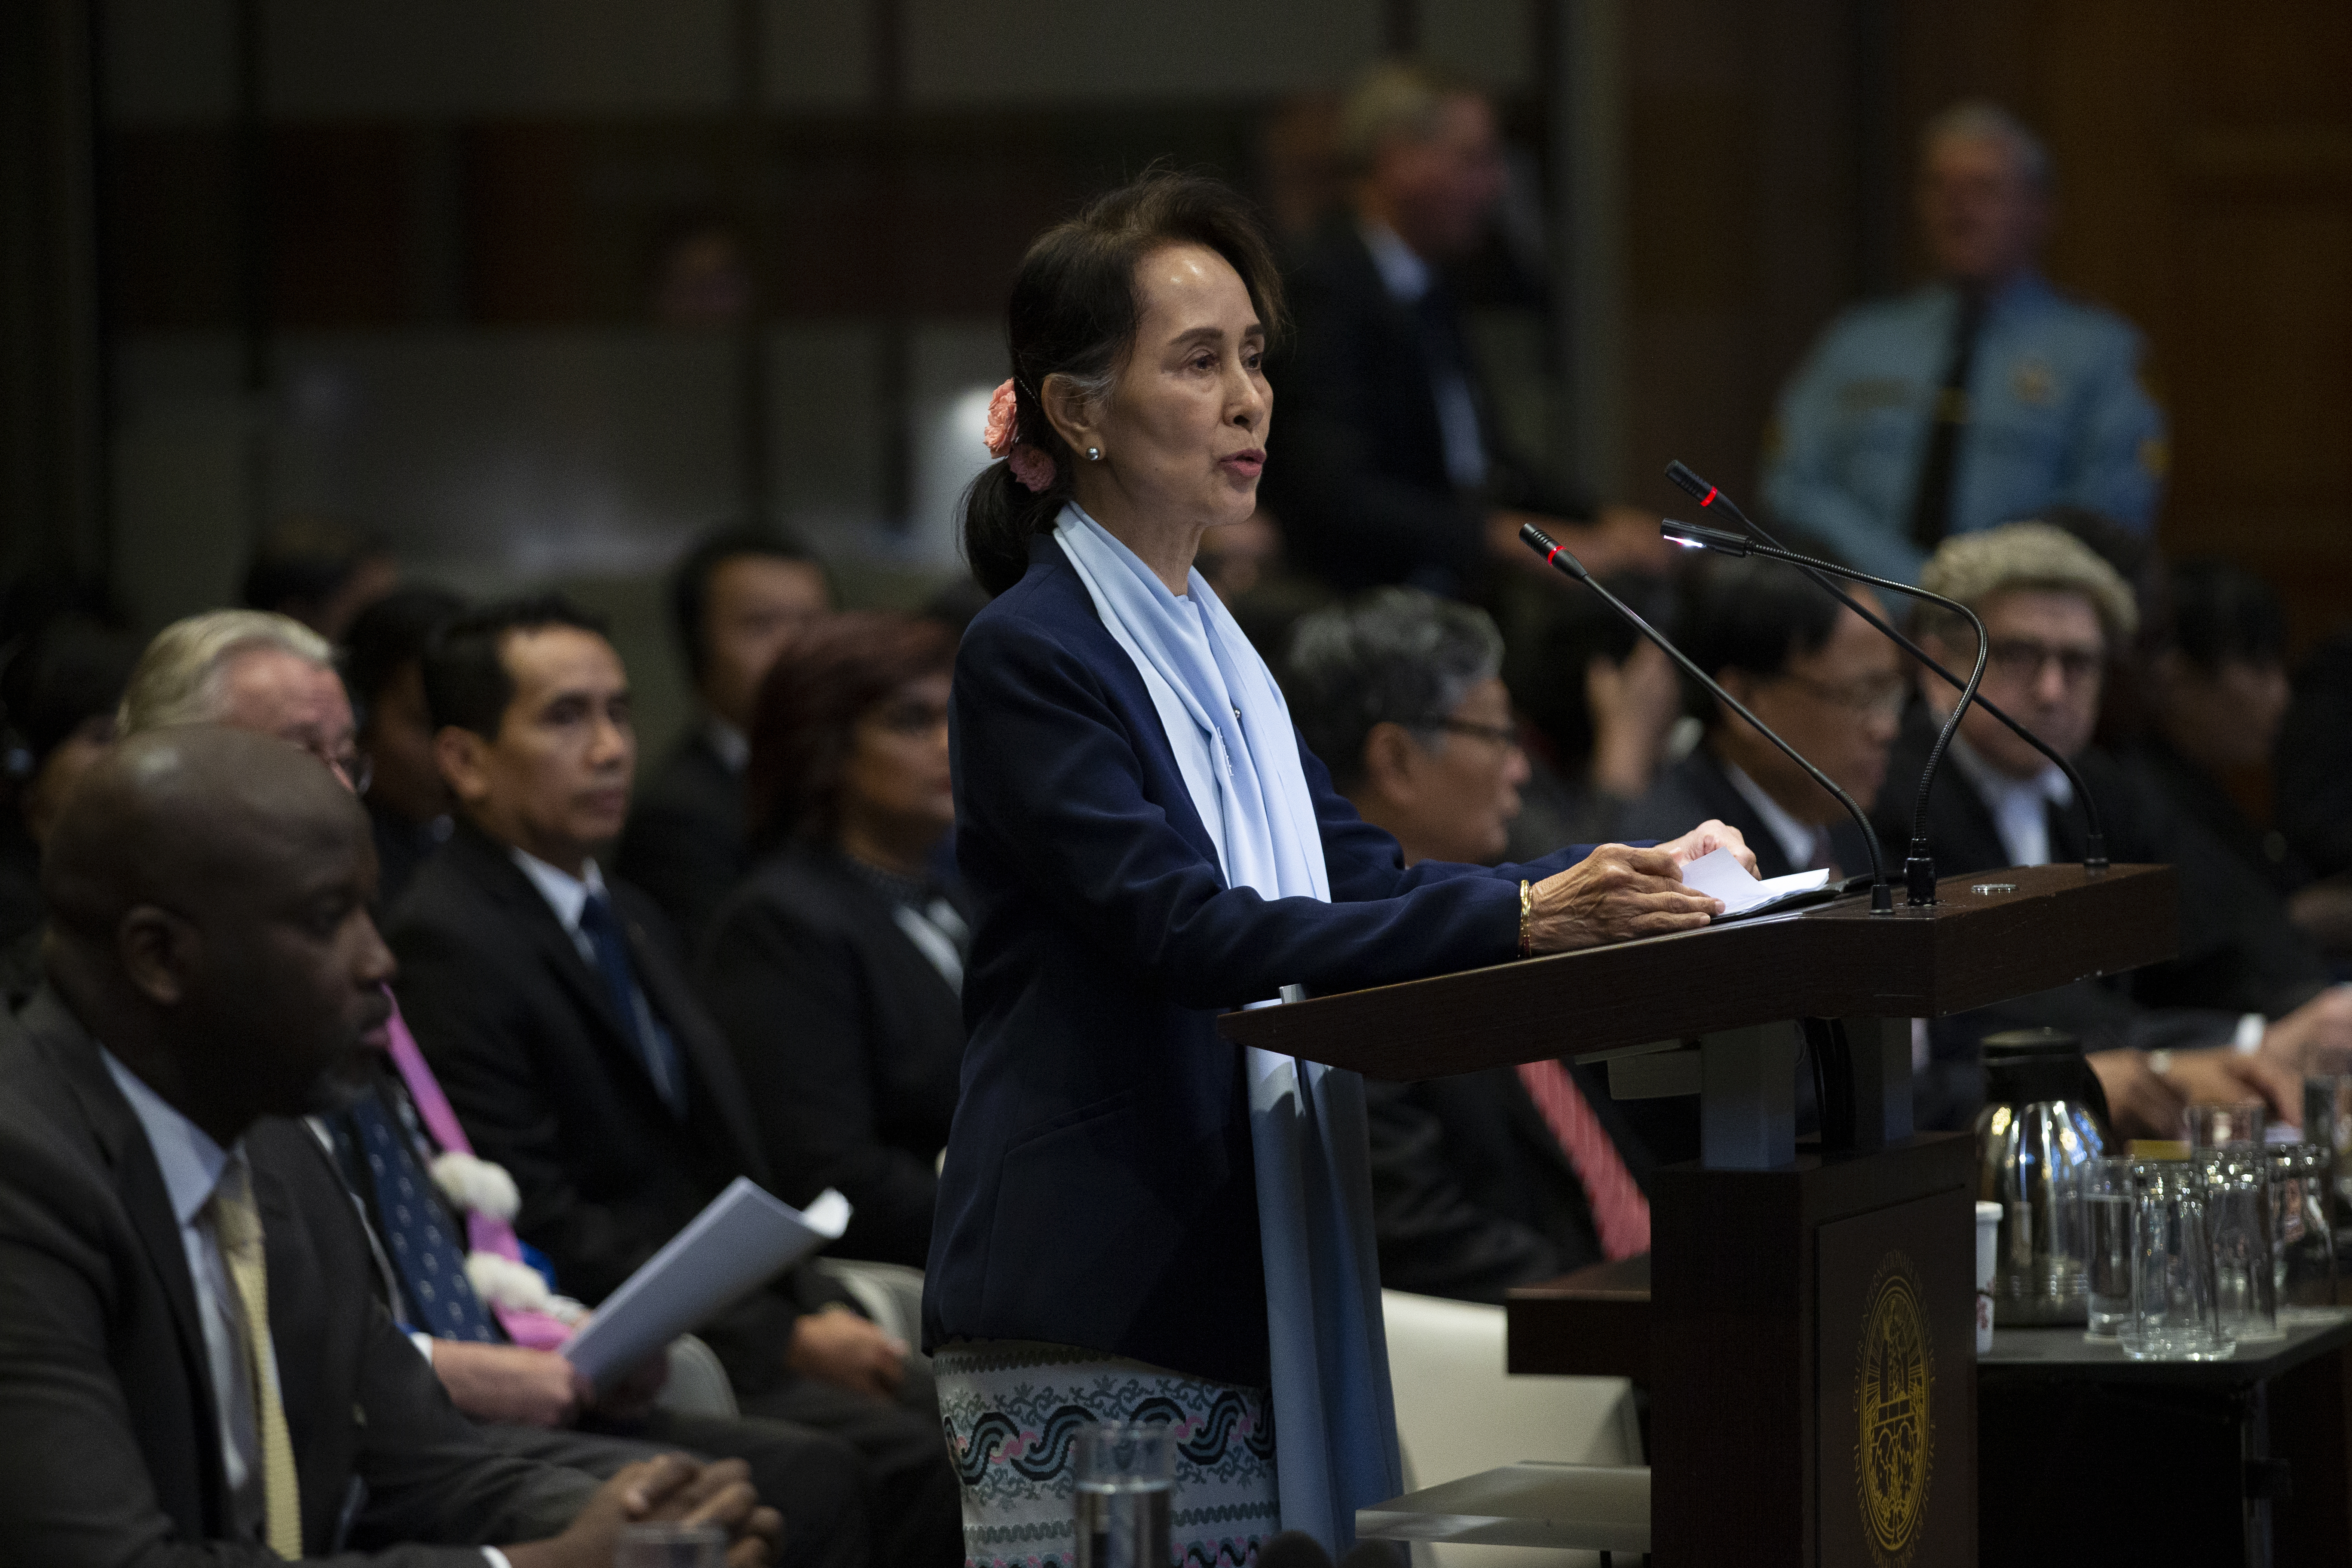 File photo: Myanmar's leader Aung San Suu Kyi addresses judges of the International Court of Justice for the second day of three days of hearings in The Hague, Netherlands.